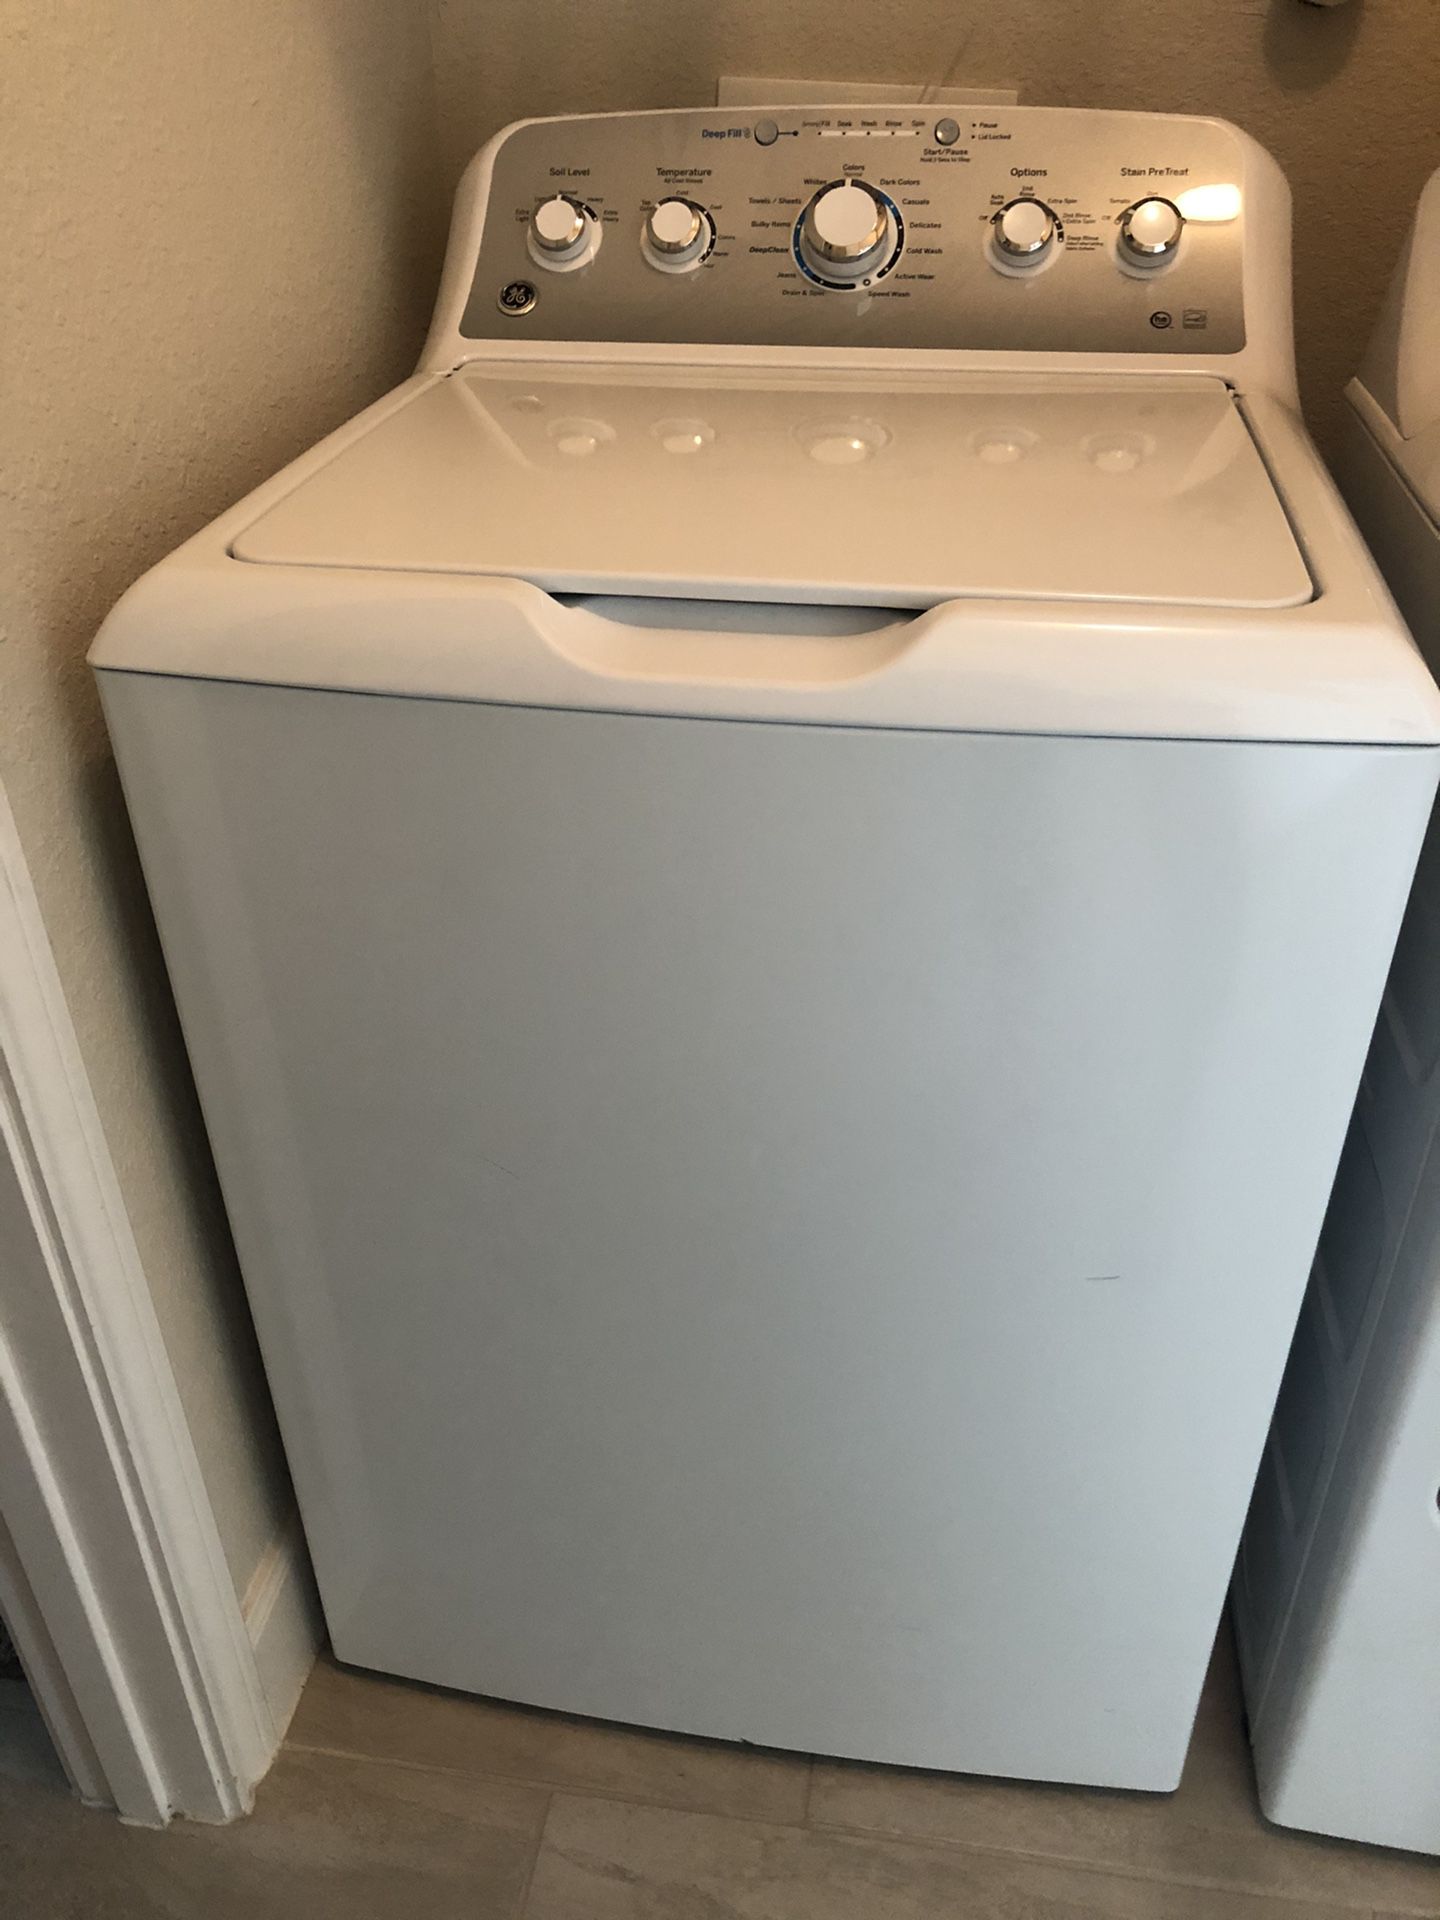 Like new GE washer and dryer set